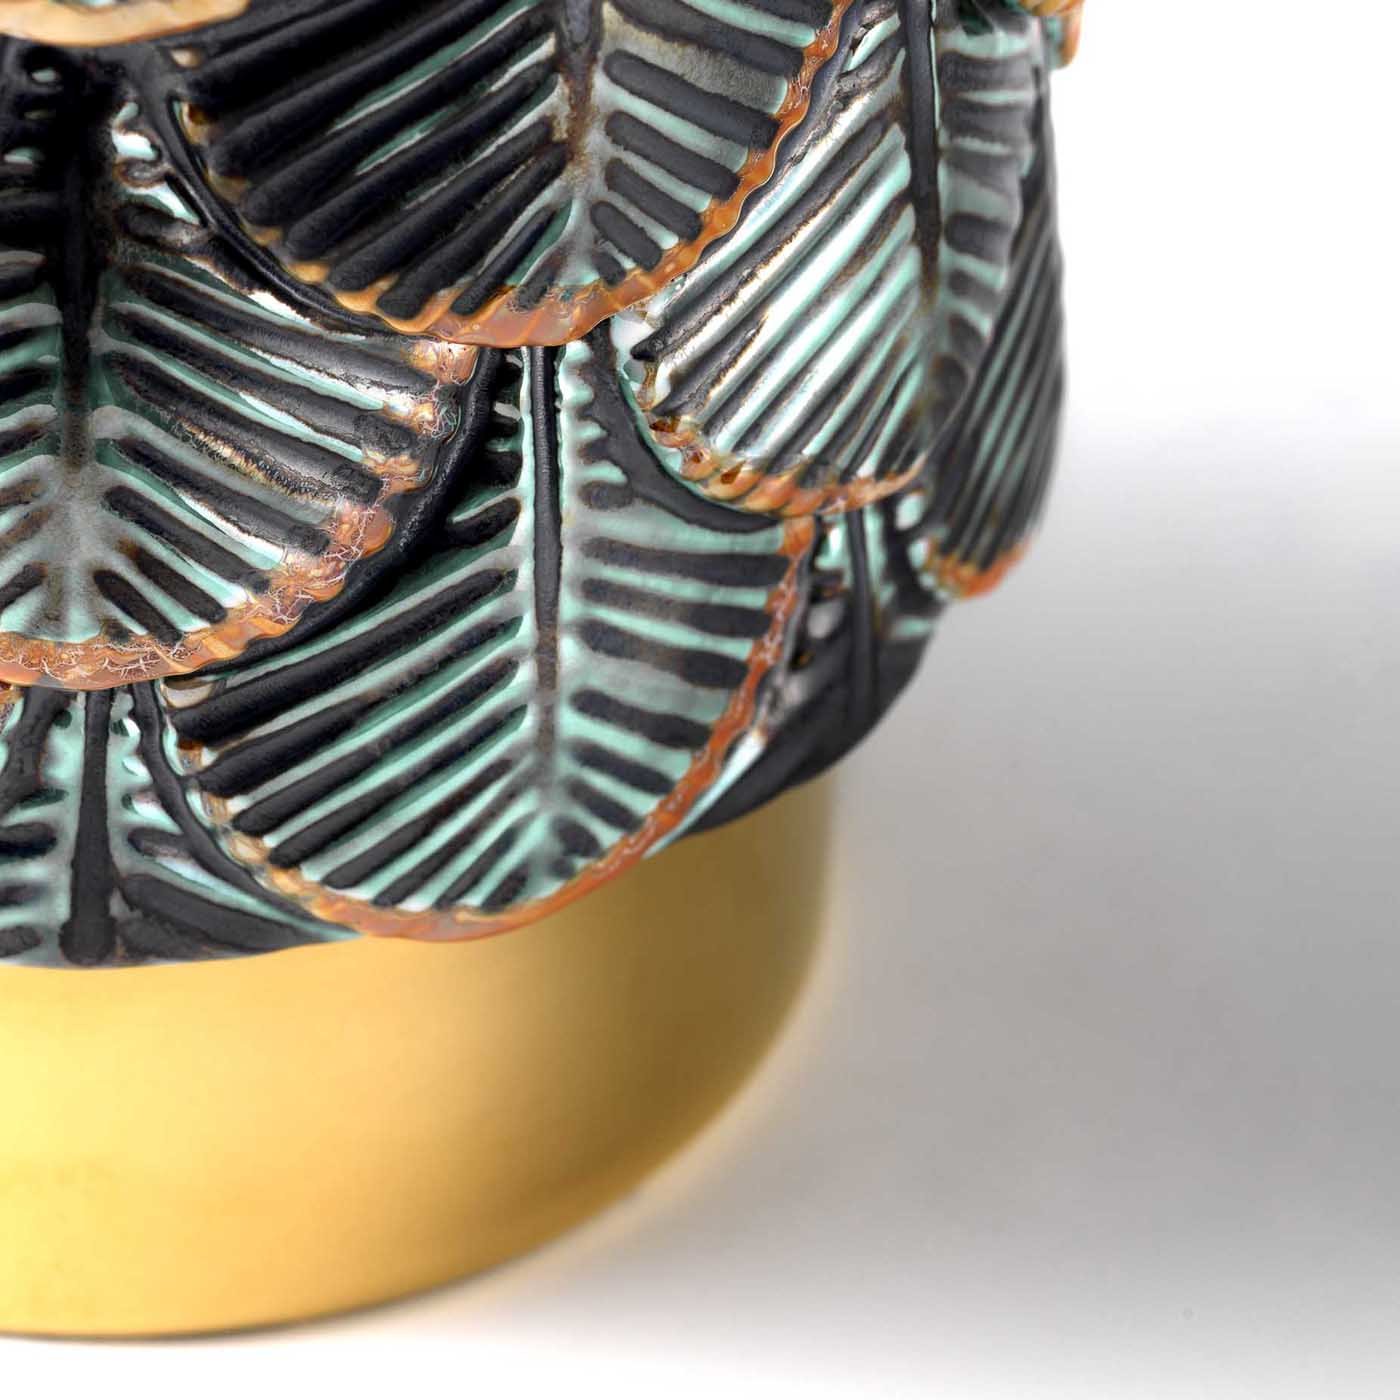 Silver Plumage Vase with 24K Gold - Alternative view 1